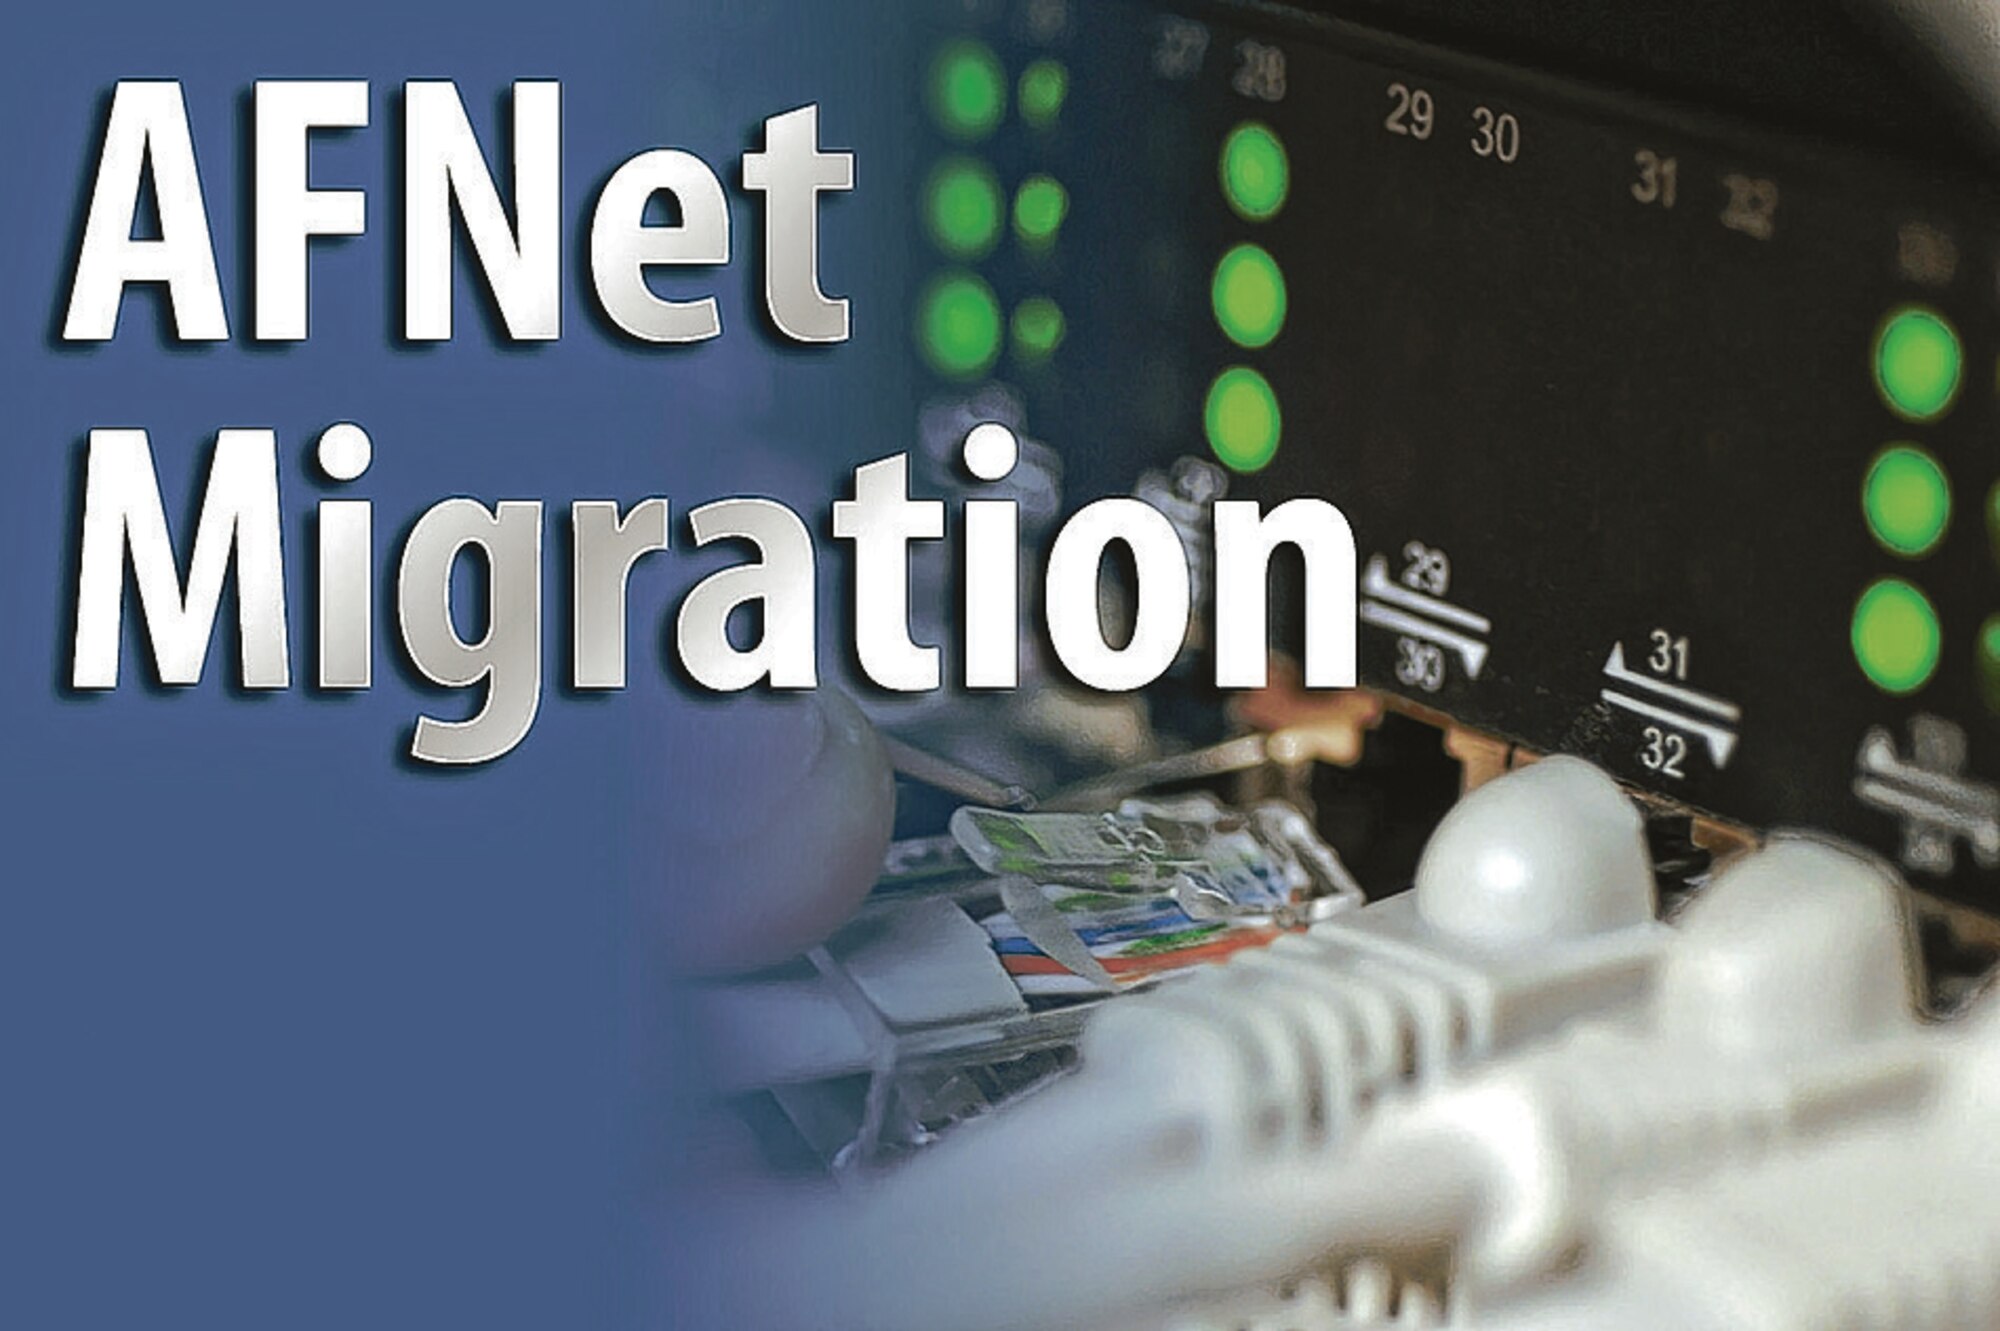 The Air Force Network Integration Center and 24th Air Force have established a centralized user directory and e-mail service for all Air Force network users. The goal of the AFNet migration project is to collapse all existing stand-alone base networks  into a single structure within the AFNet under the operational control of a single
commander.